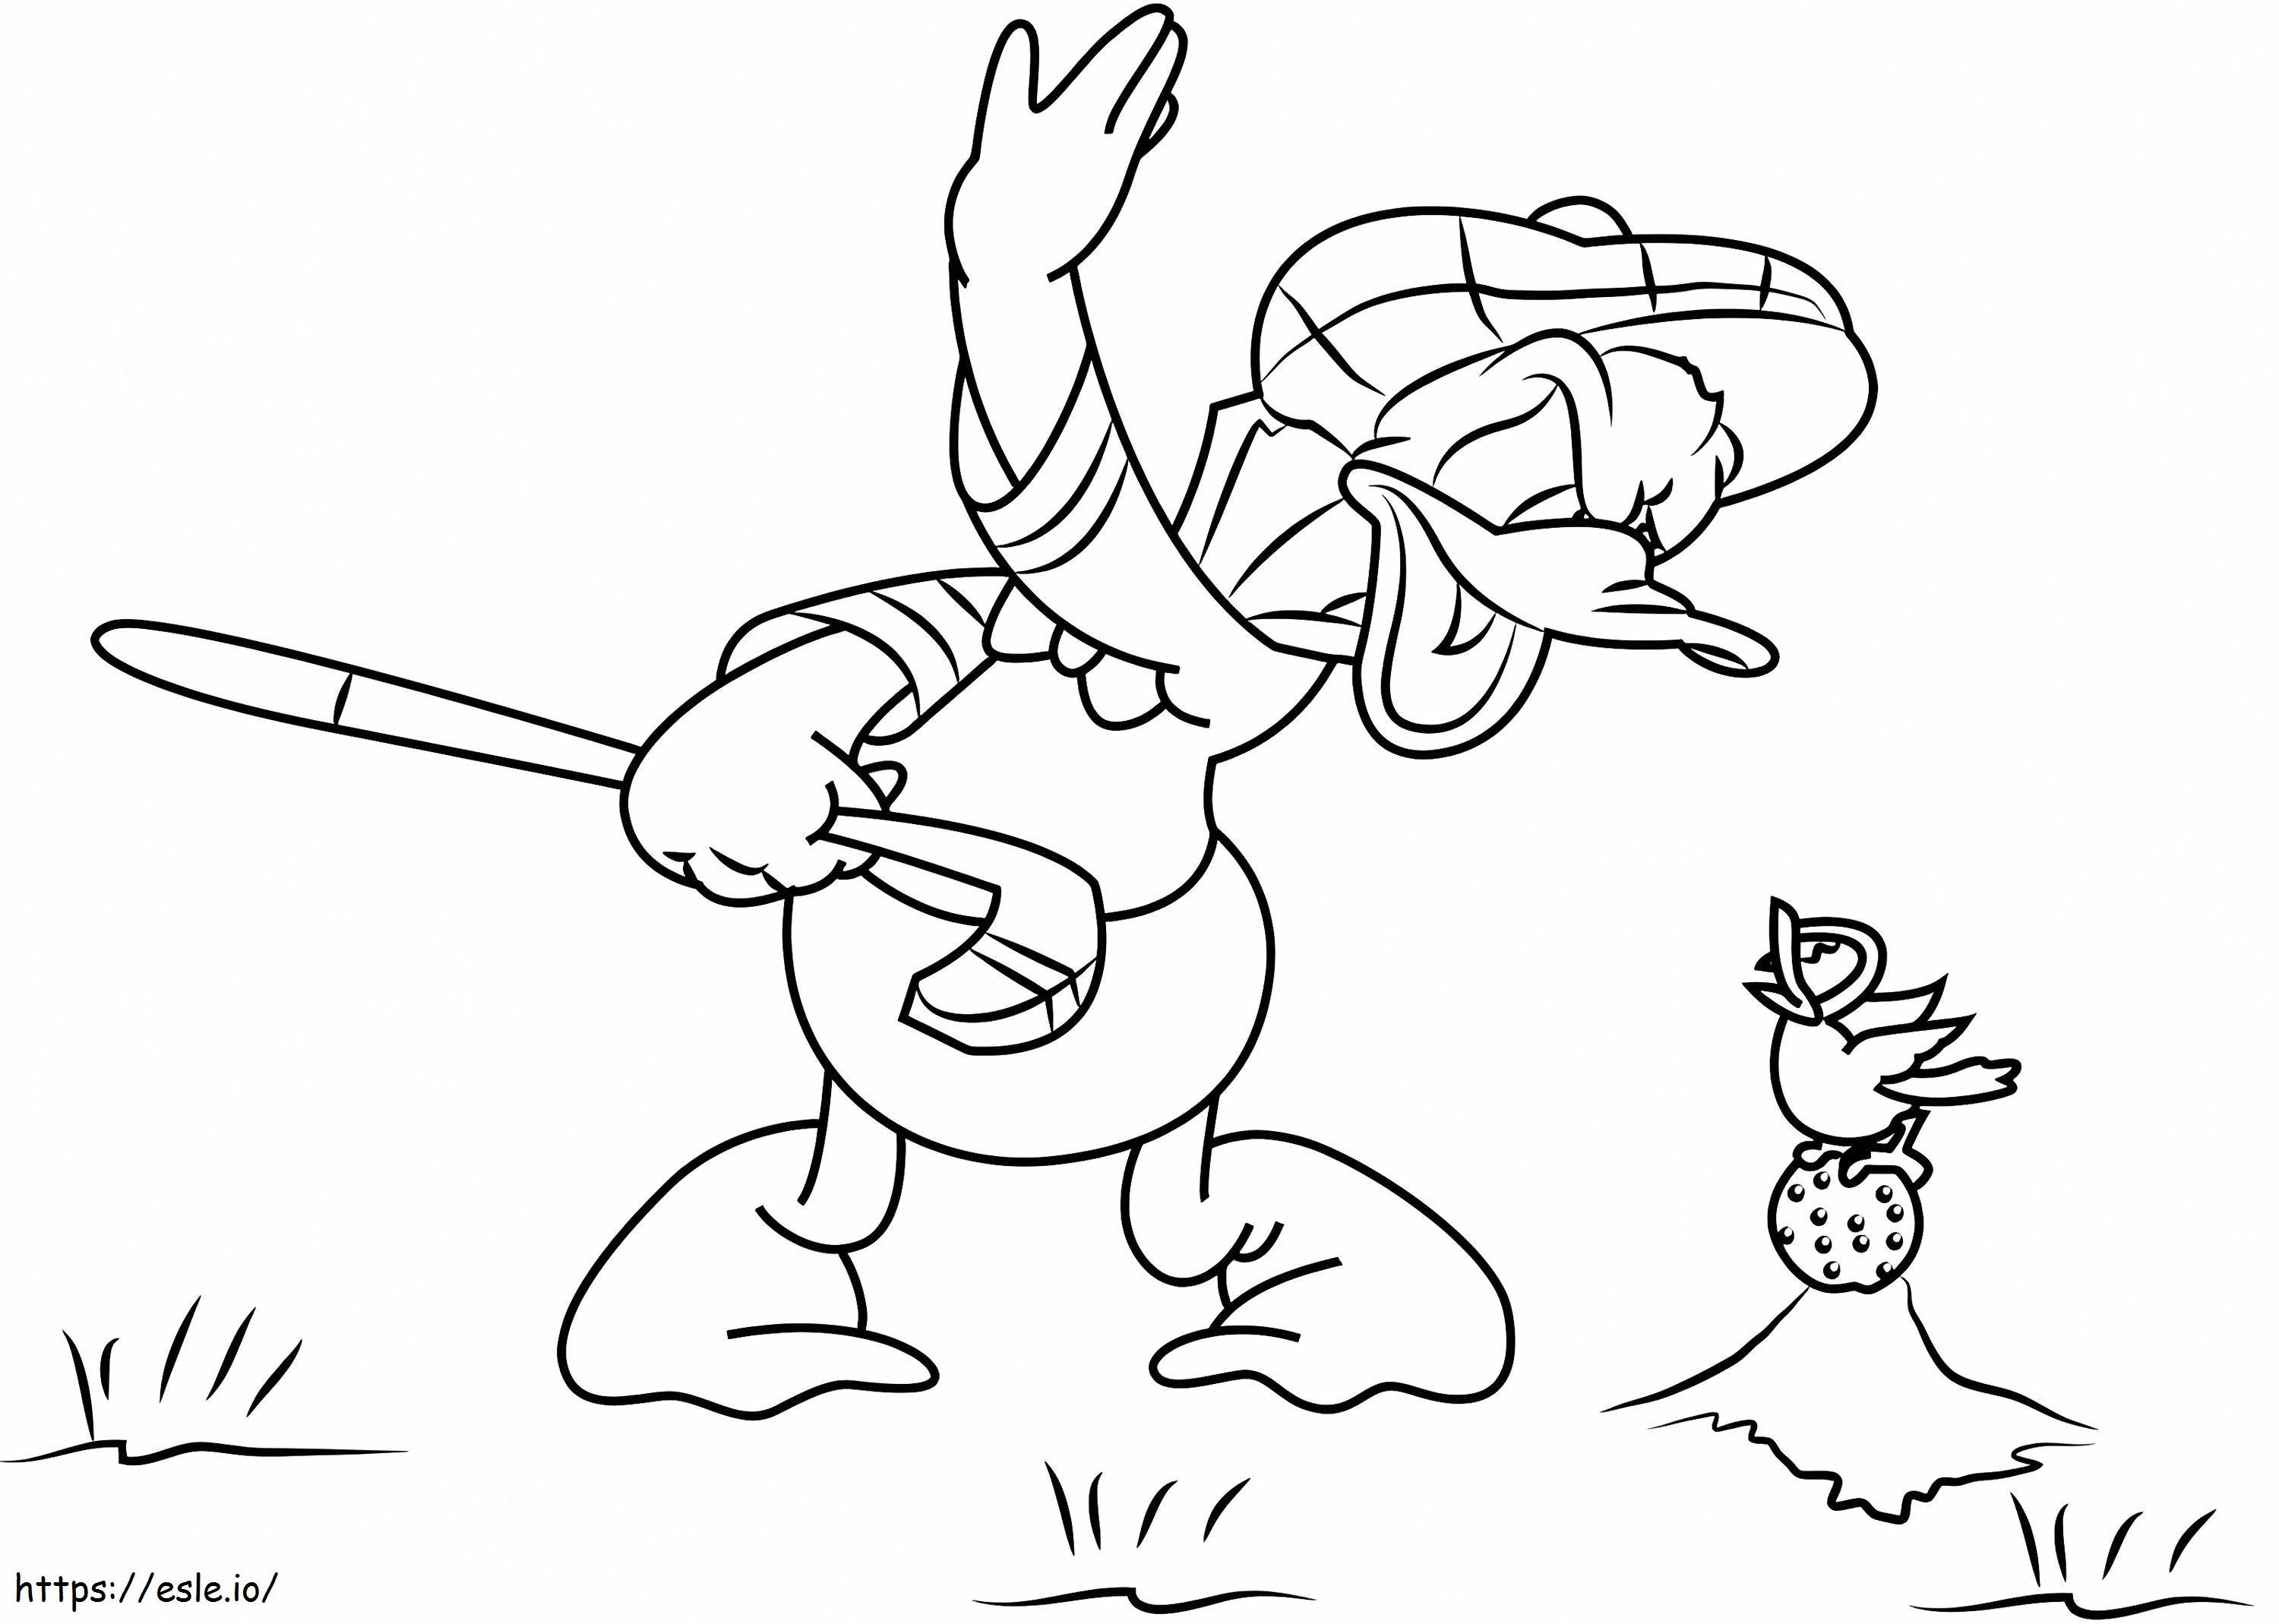 1532316730 Donald Duck Playing Golf A4 E1600335112610 coloring page